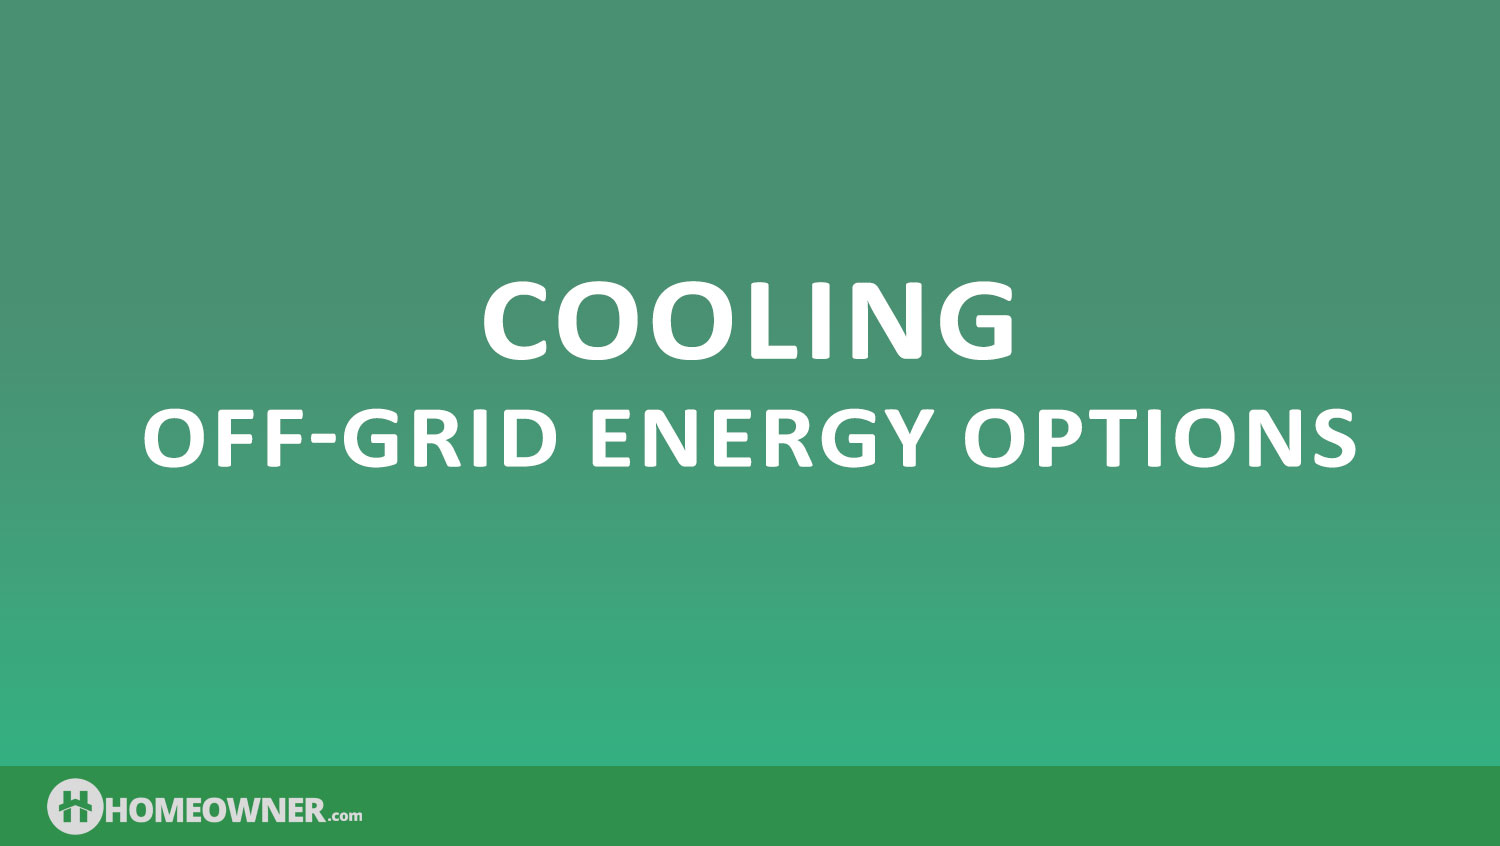 Cooling: Off-Grid Energy Options